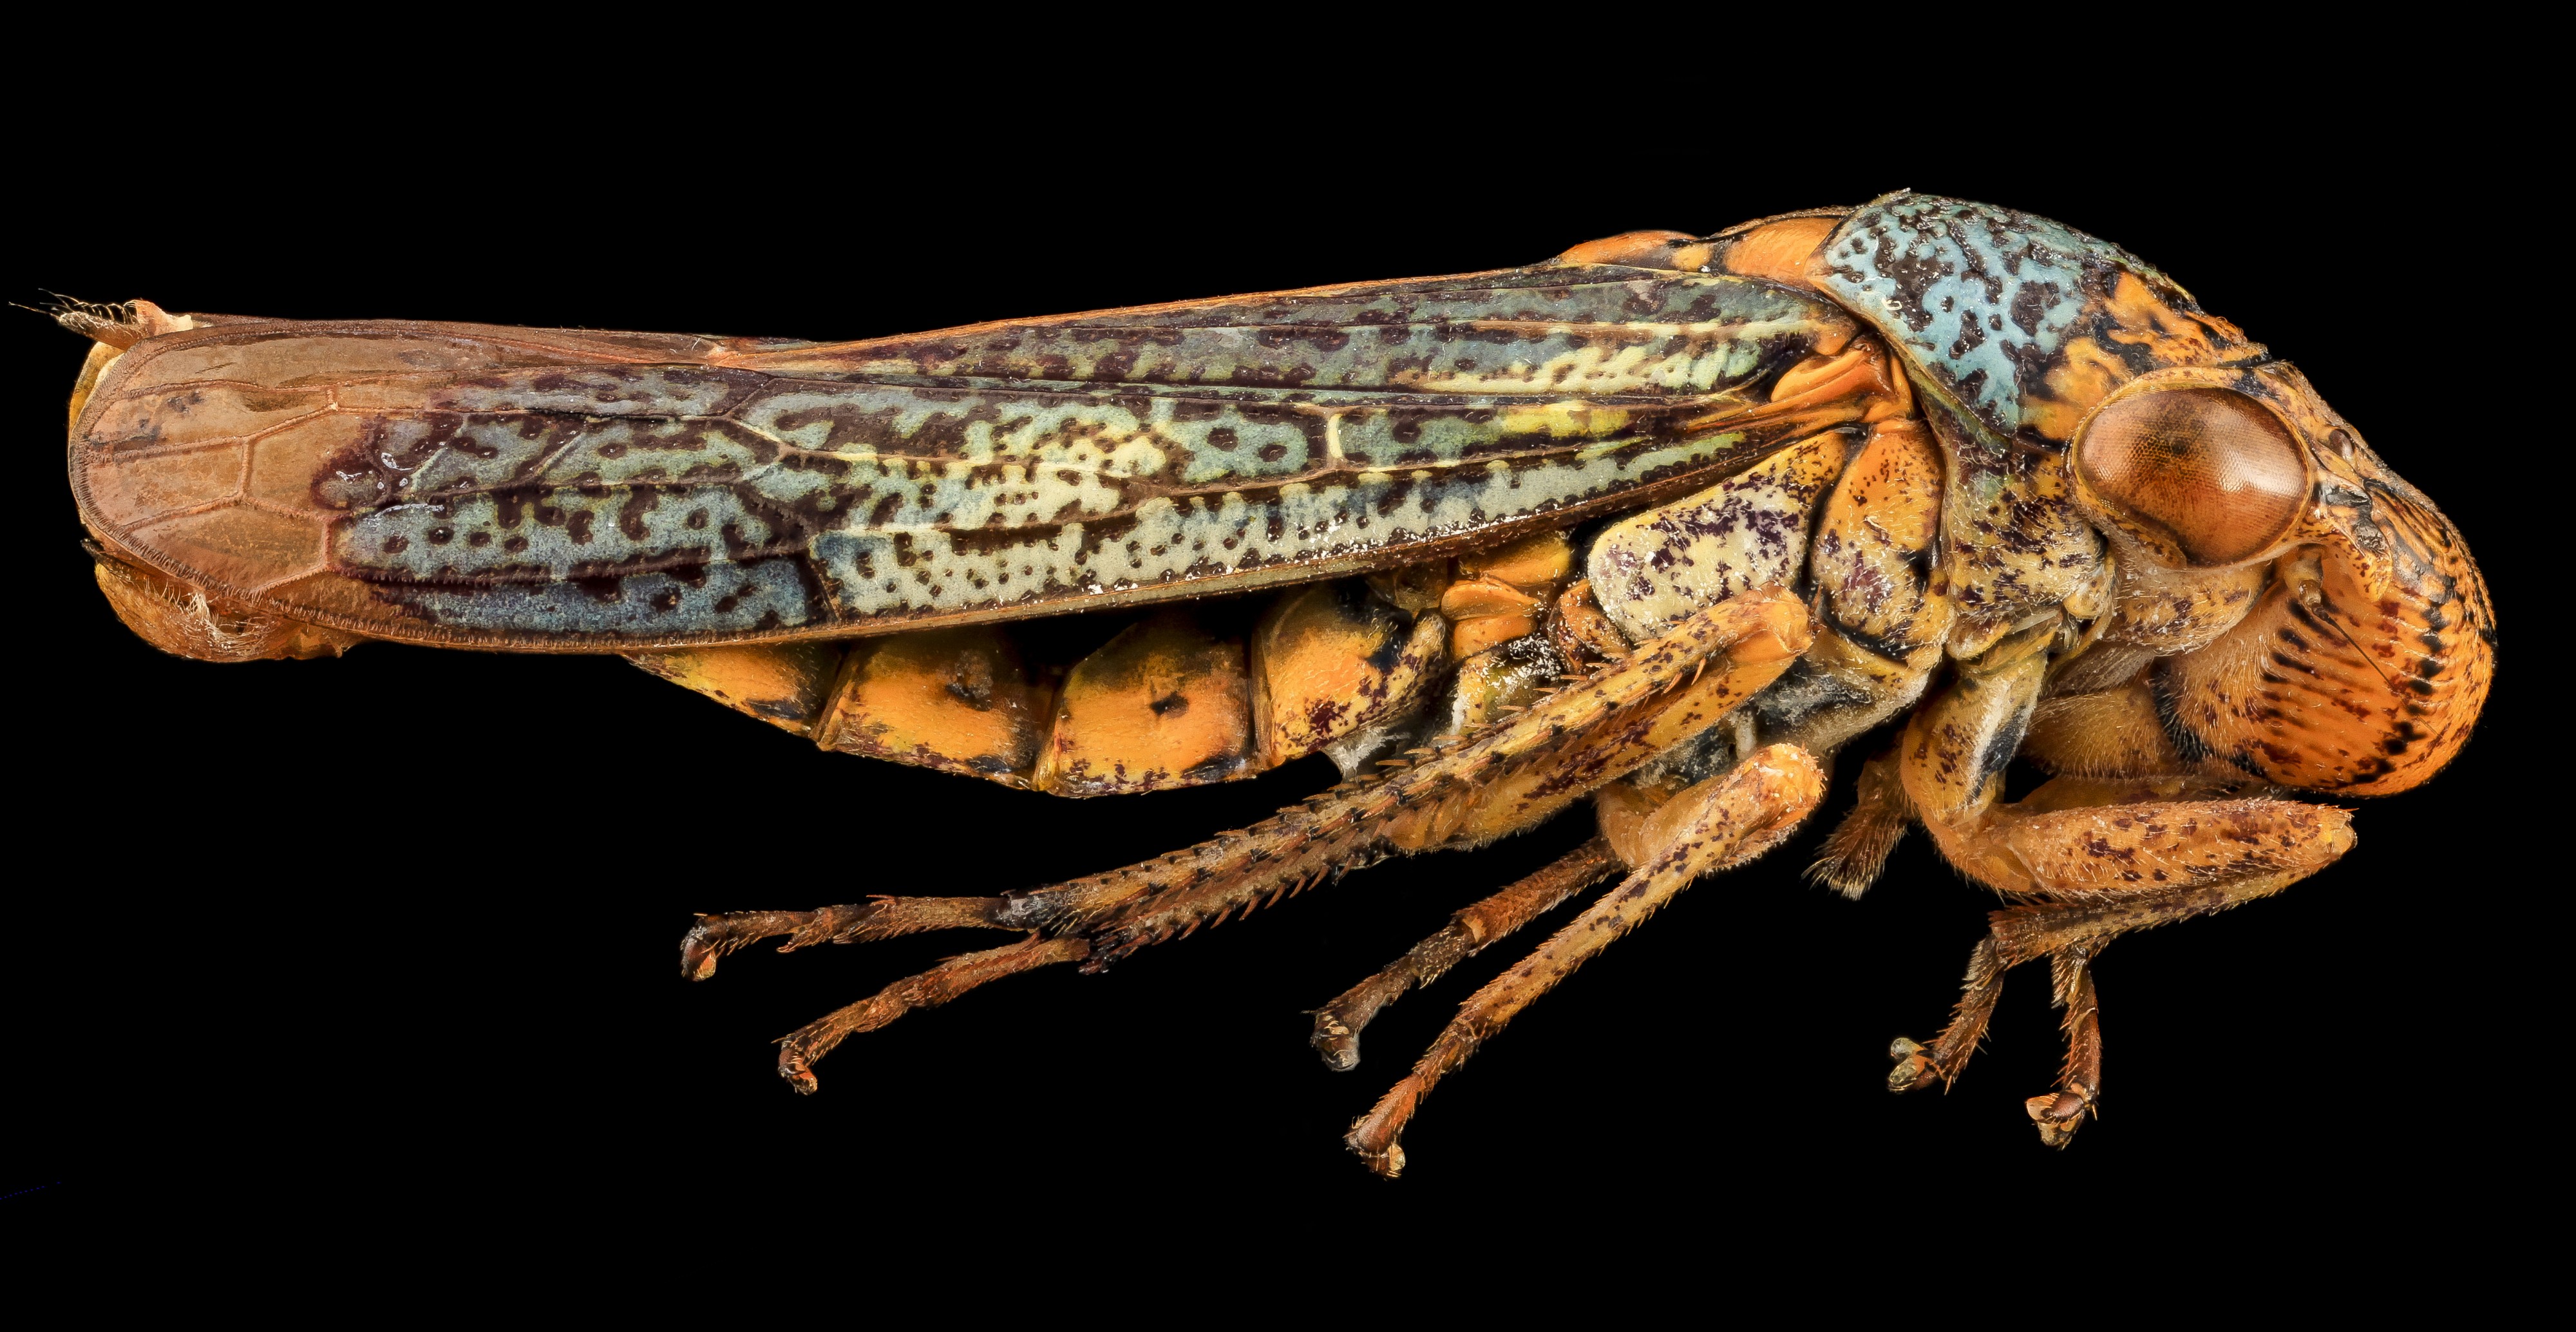 Sharpshooter, U, Side, MD, PG County 2013-08-05-18.12.40 ZS PMax (9472763125)